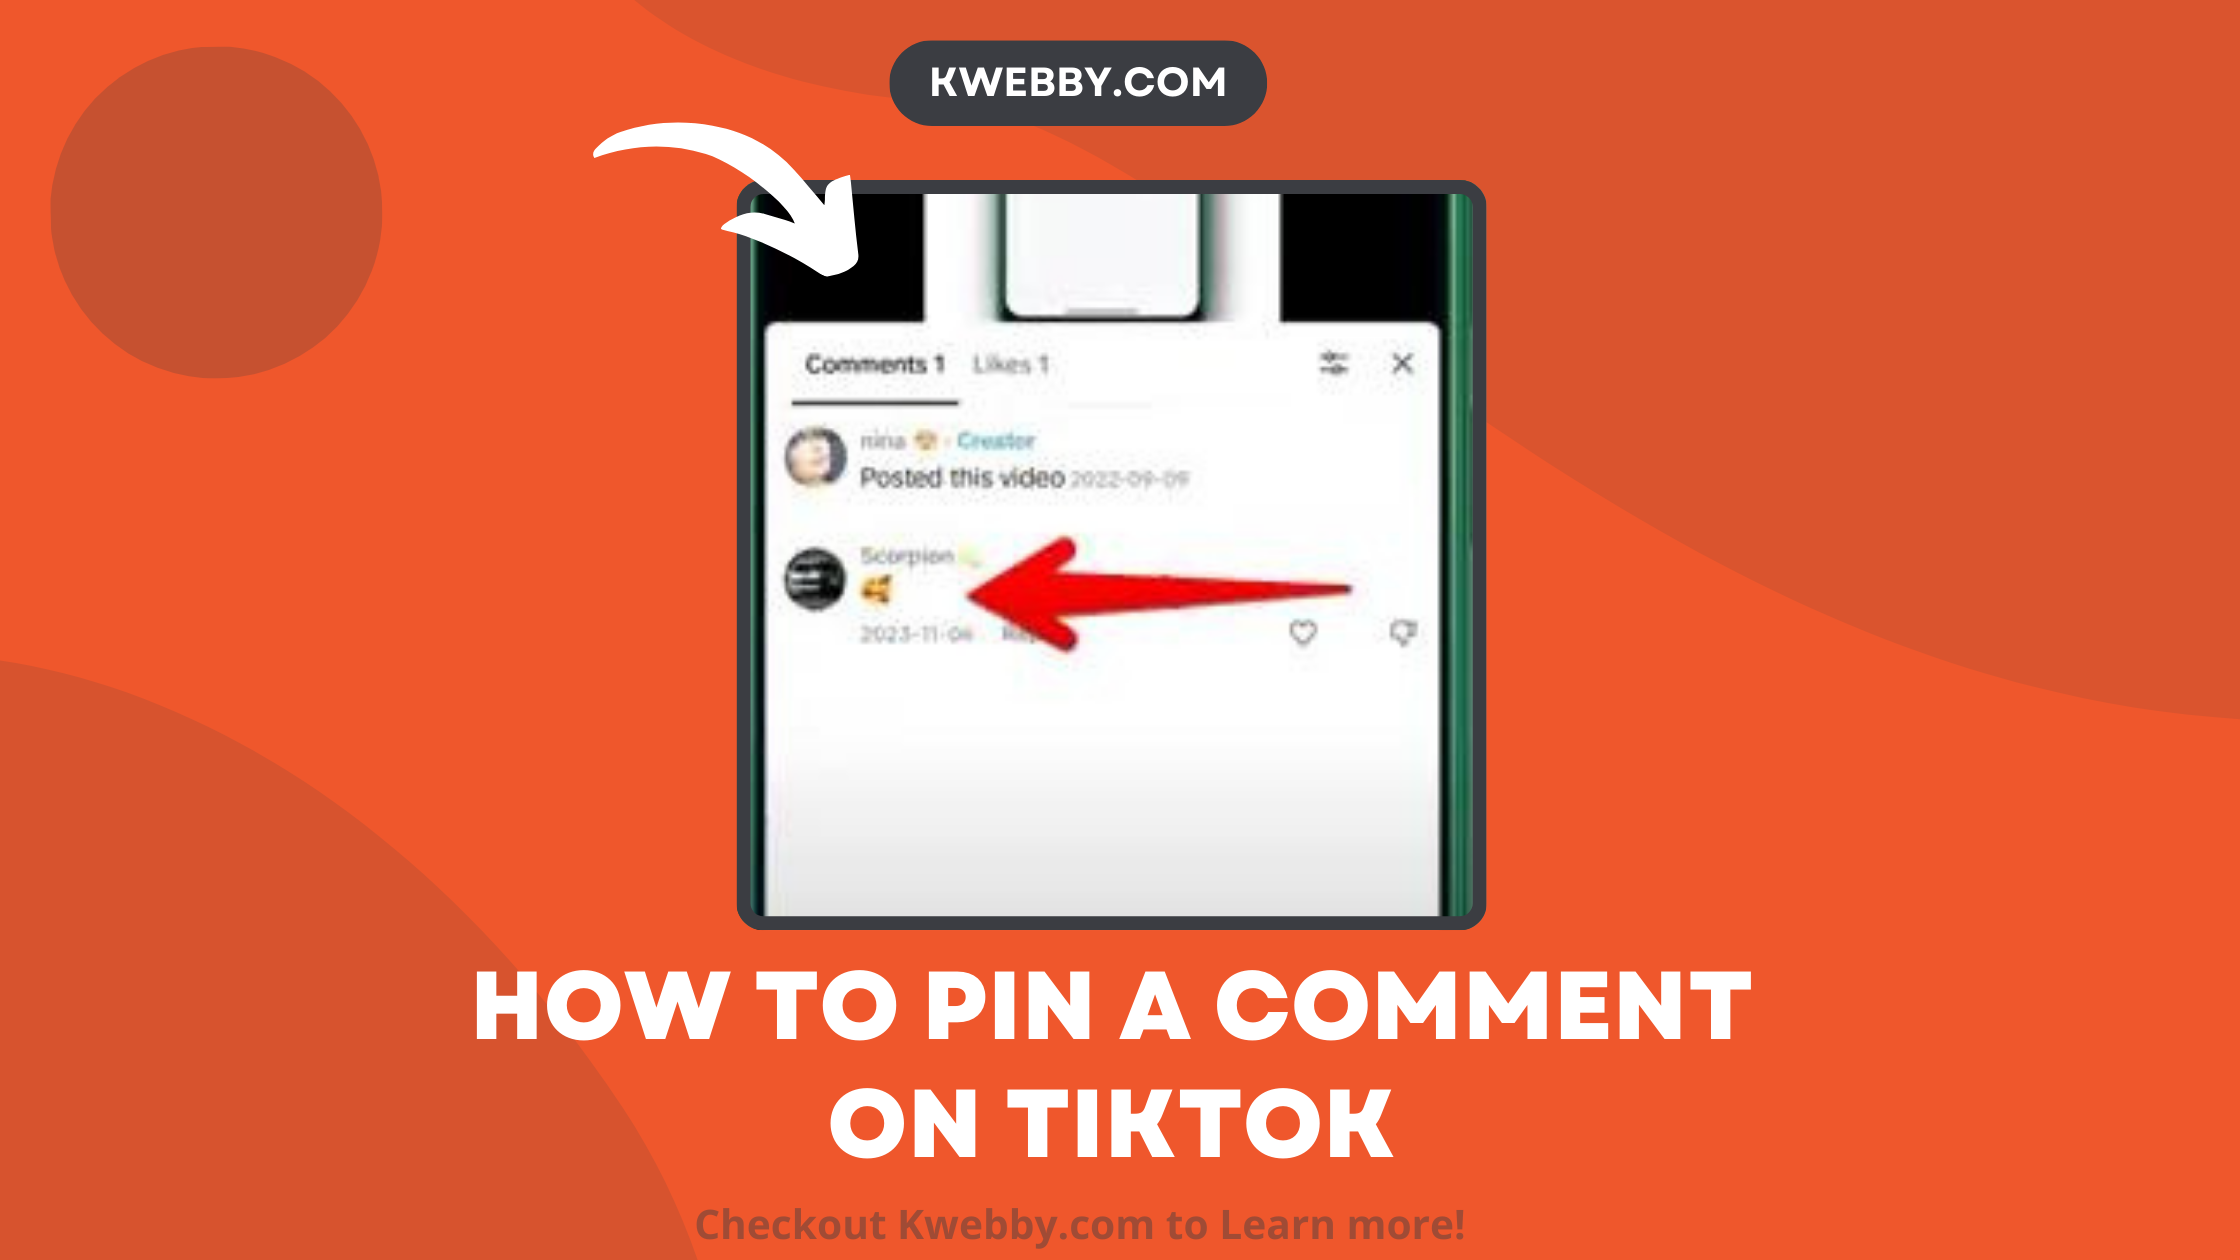 How to PIN a comment on TikTok